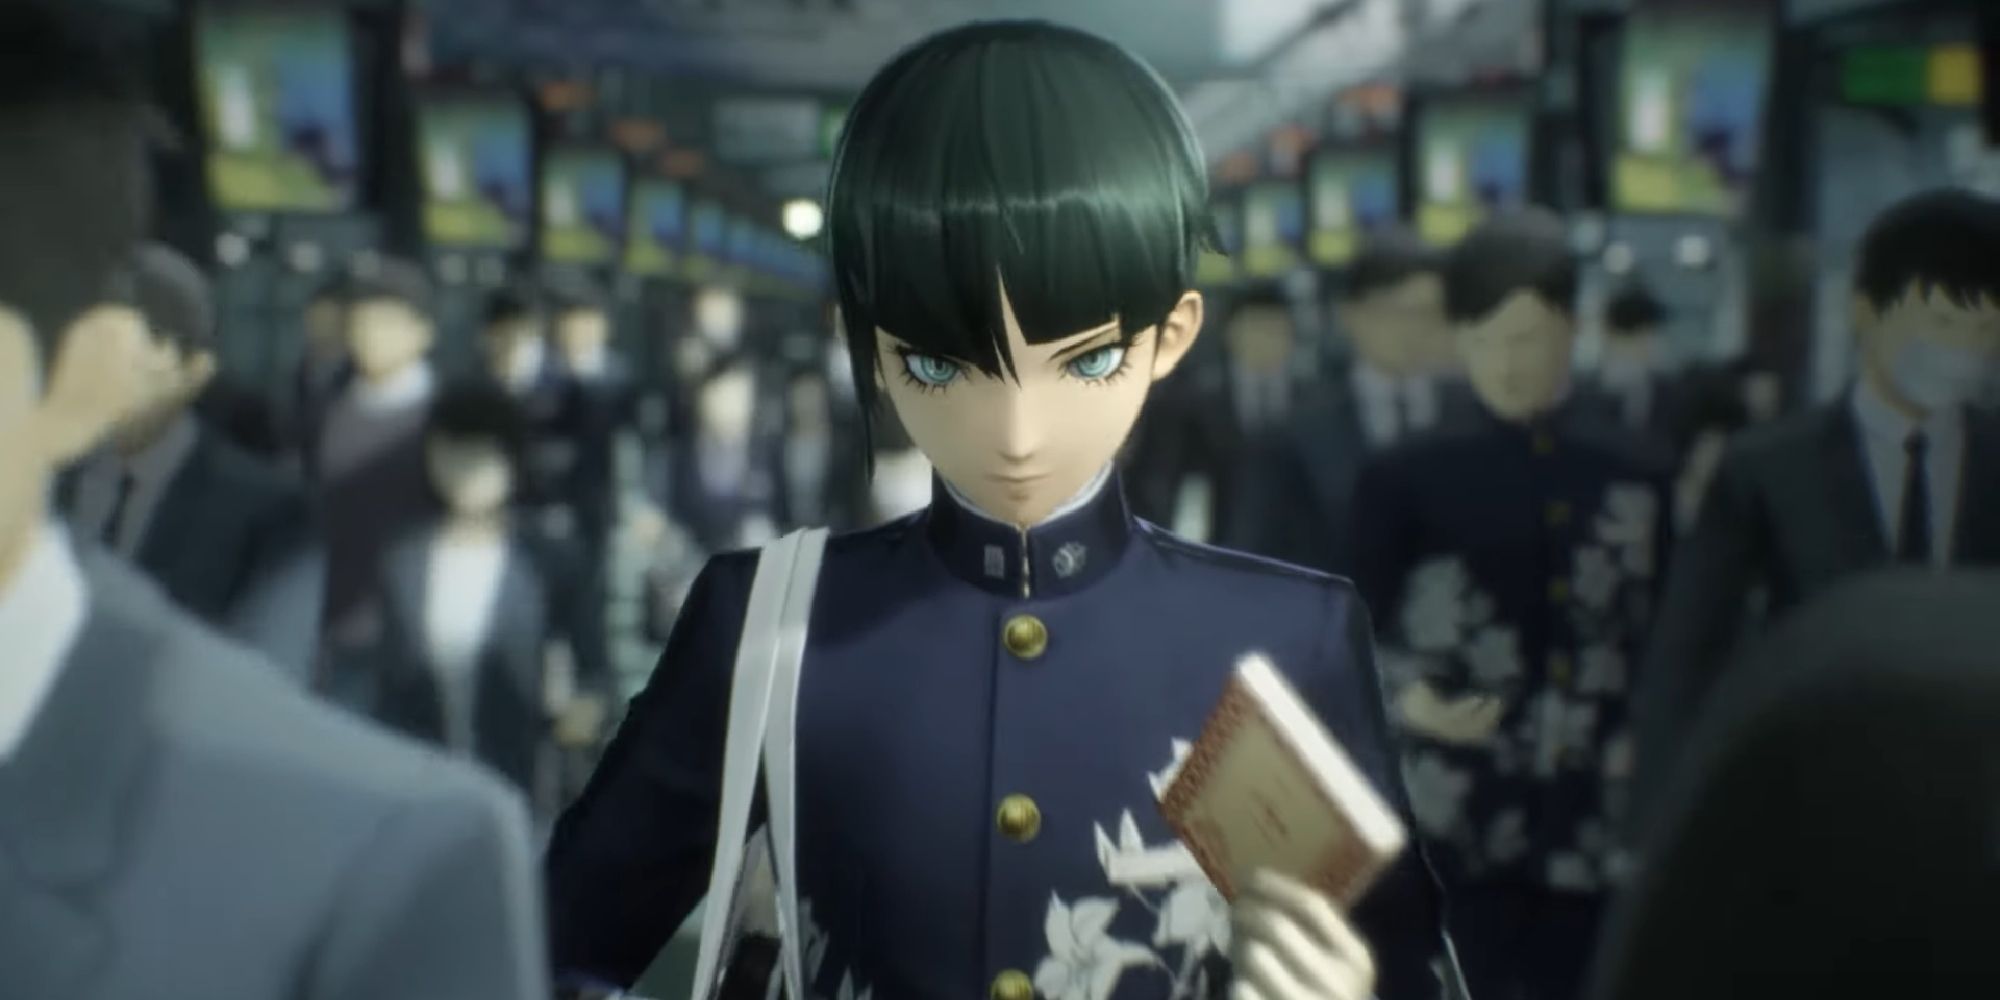 A screenshot from the reveal trailer of Shin Megami Tensei 5, showing the main character surrounded by faceless, anonymous NPCs